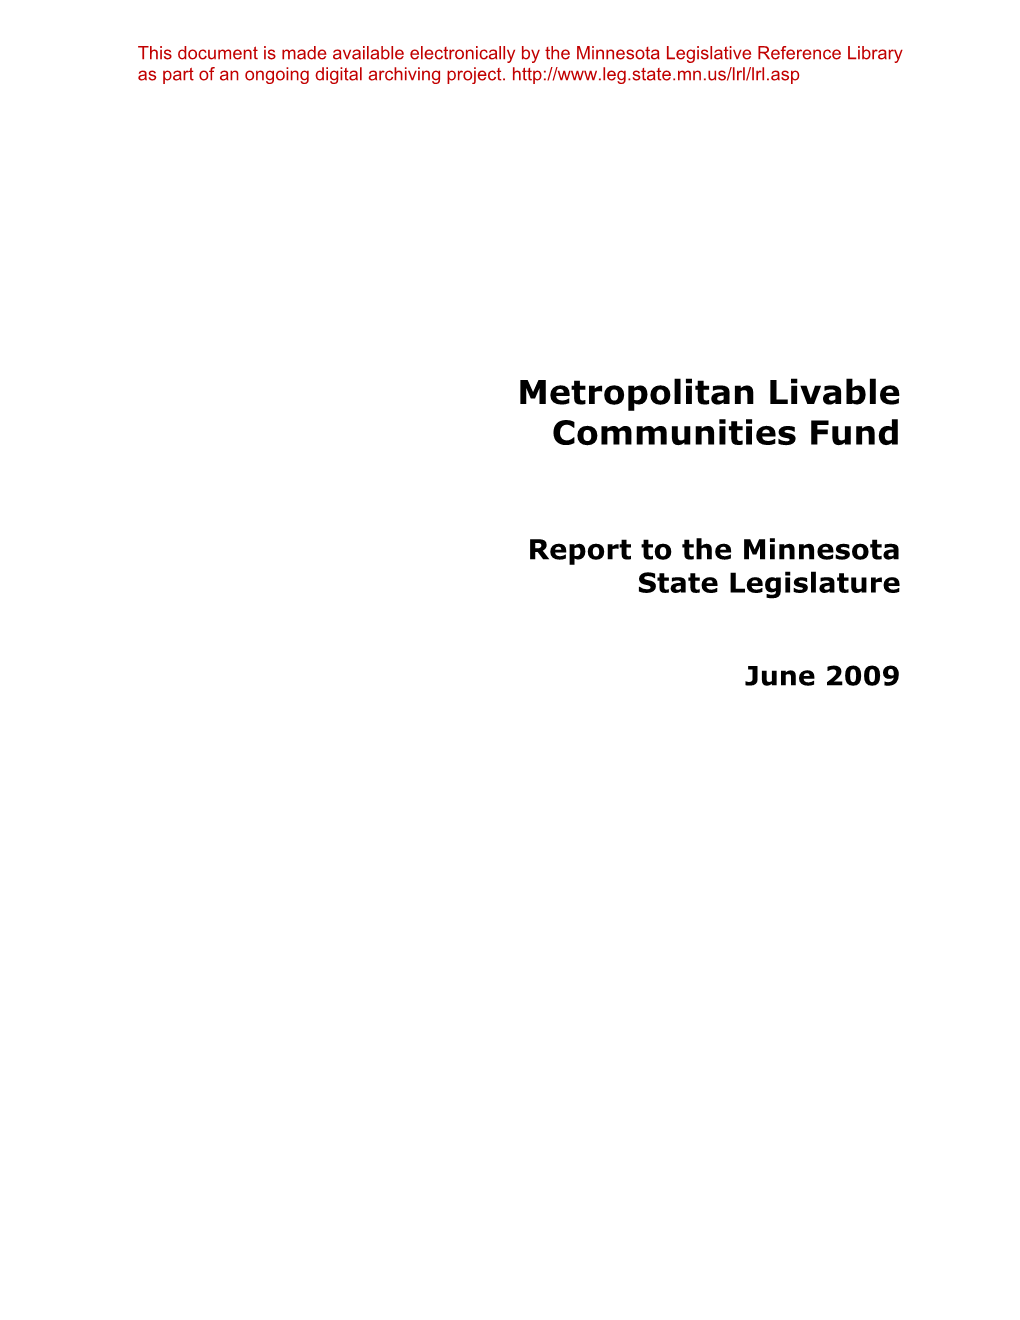 2009 Livable Communities Act Annual Report to the State Legislature